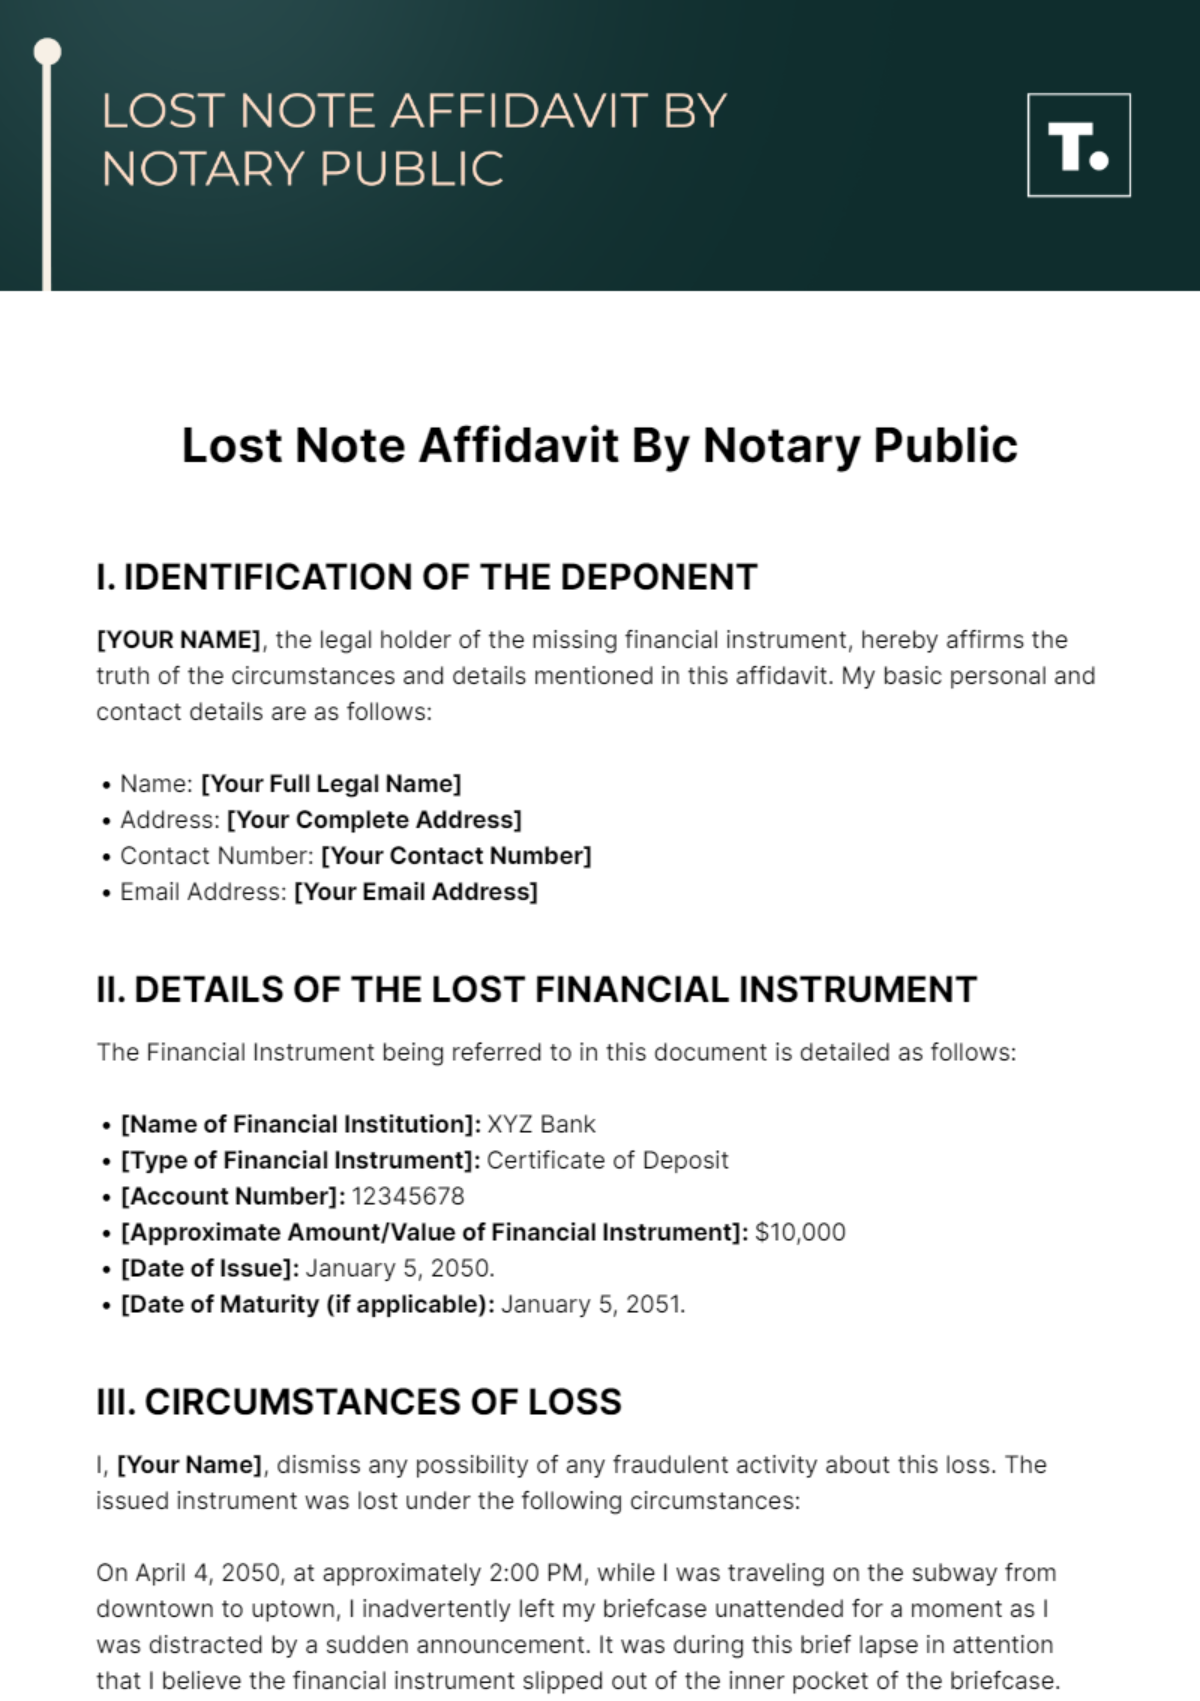 Lost Note Affidavit By Notary Public Template